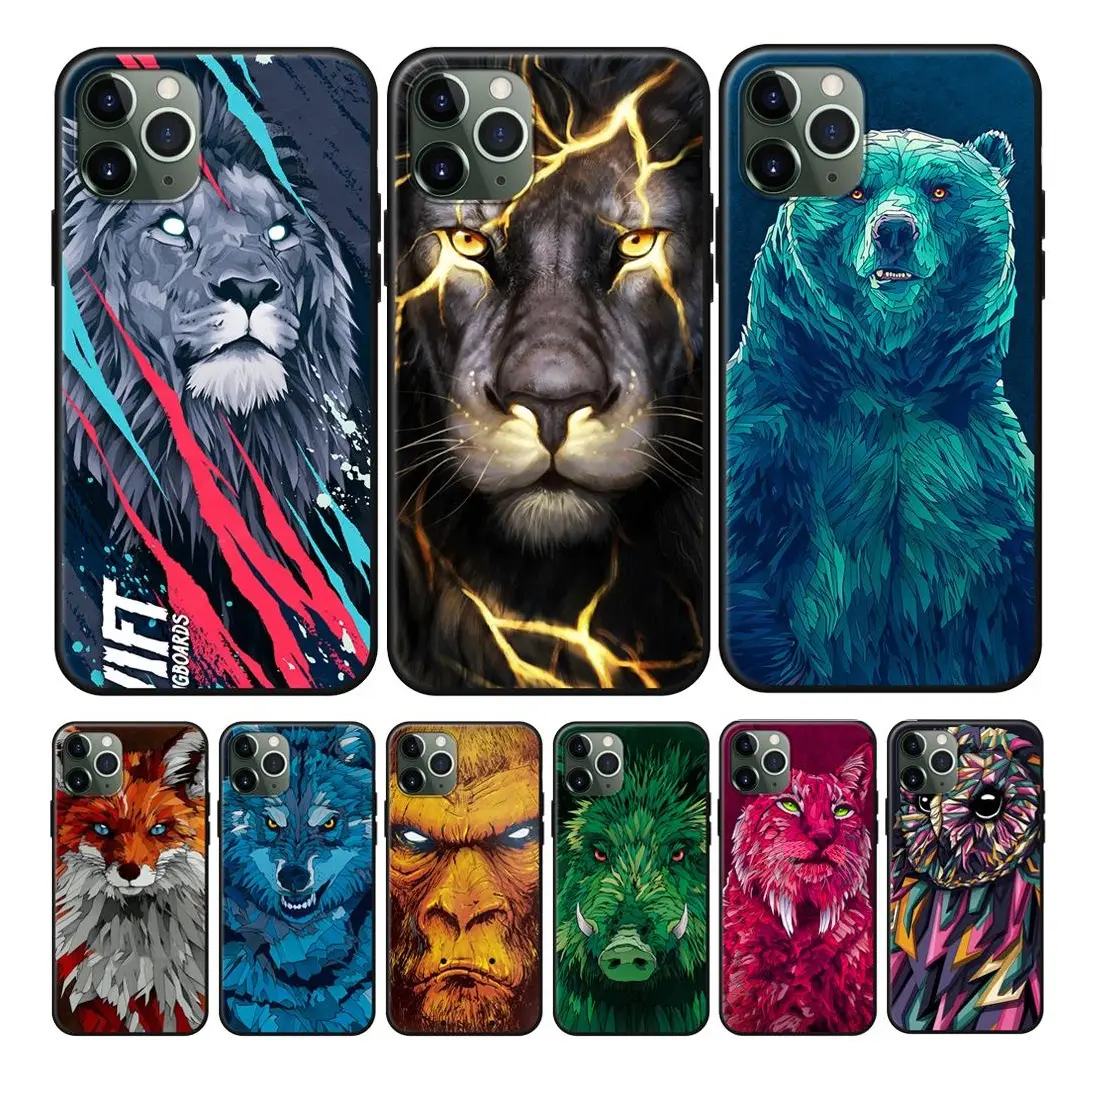 Cool Animals Pattern TPU Silicone Case For iPhone 5/6/7/8 Plus Xs Max TPU UV Printing Cover for iPhone 11/12 Pro Max SE 2020